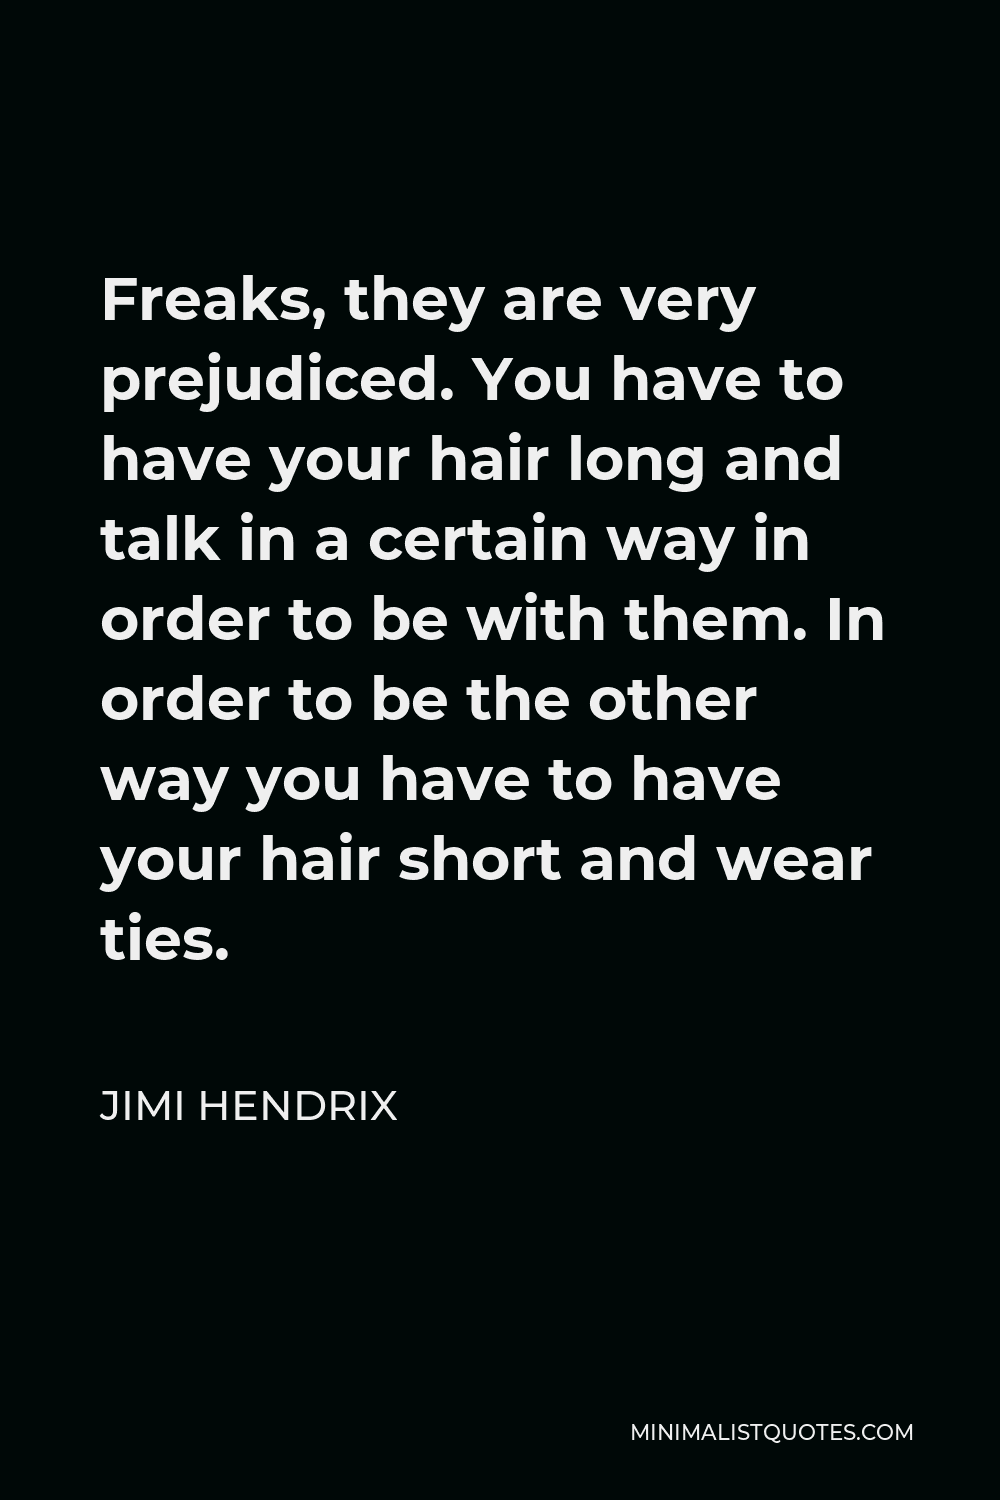 Jimi Hendrix Quote - Freaks, they are very prejudiced. You have to have your hair long and talk in a certain way in order to be with them. In order to be the other way you have to have your hair short and wear ties.